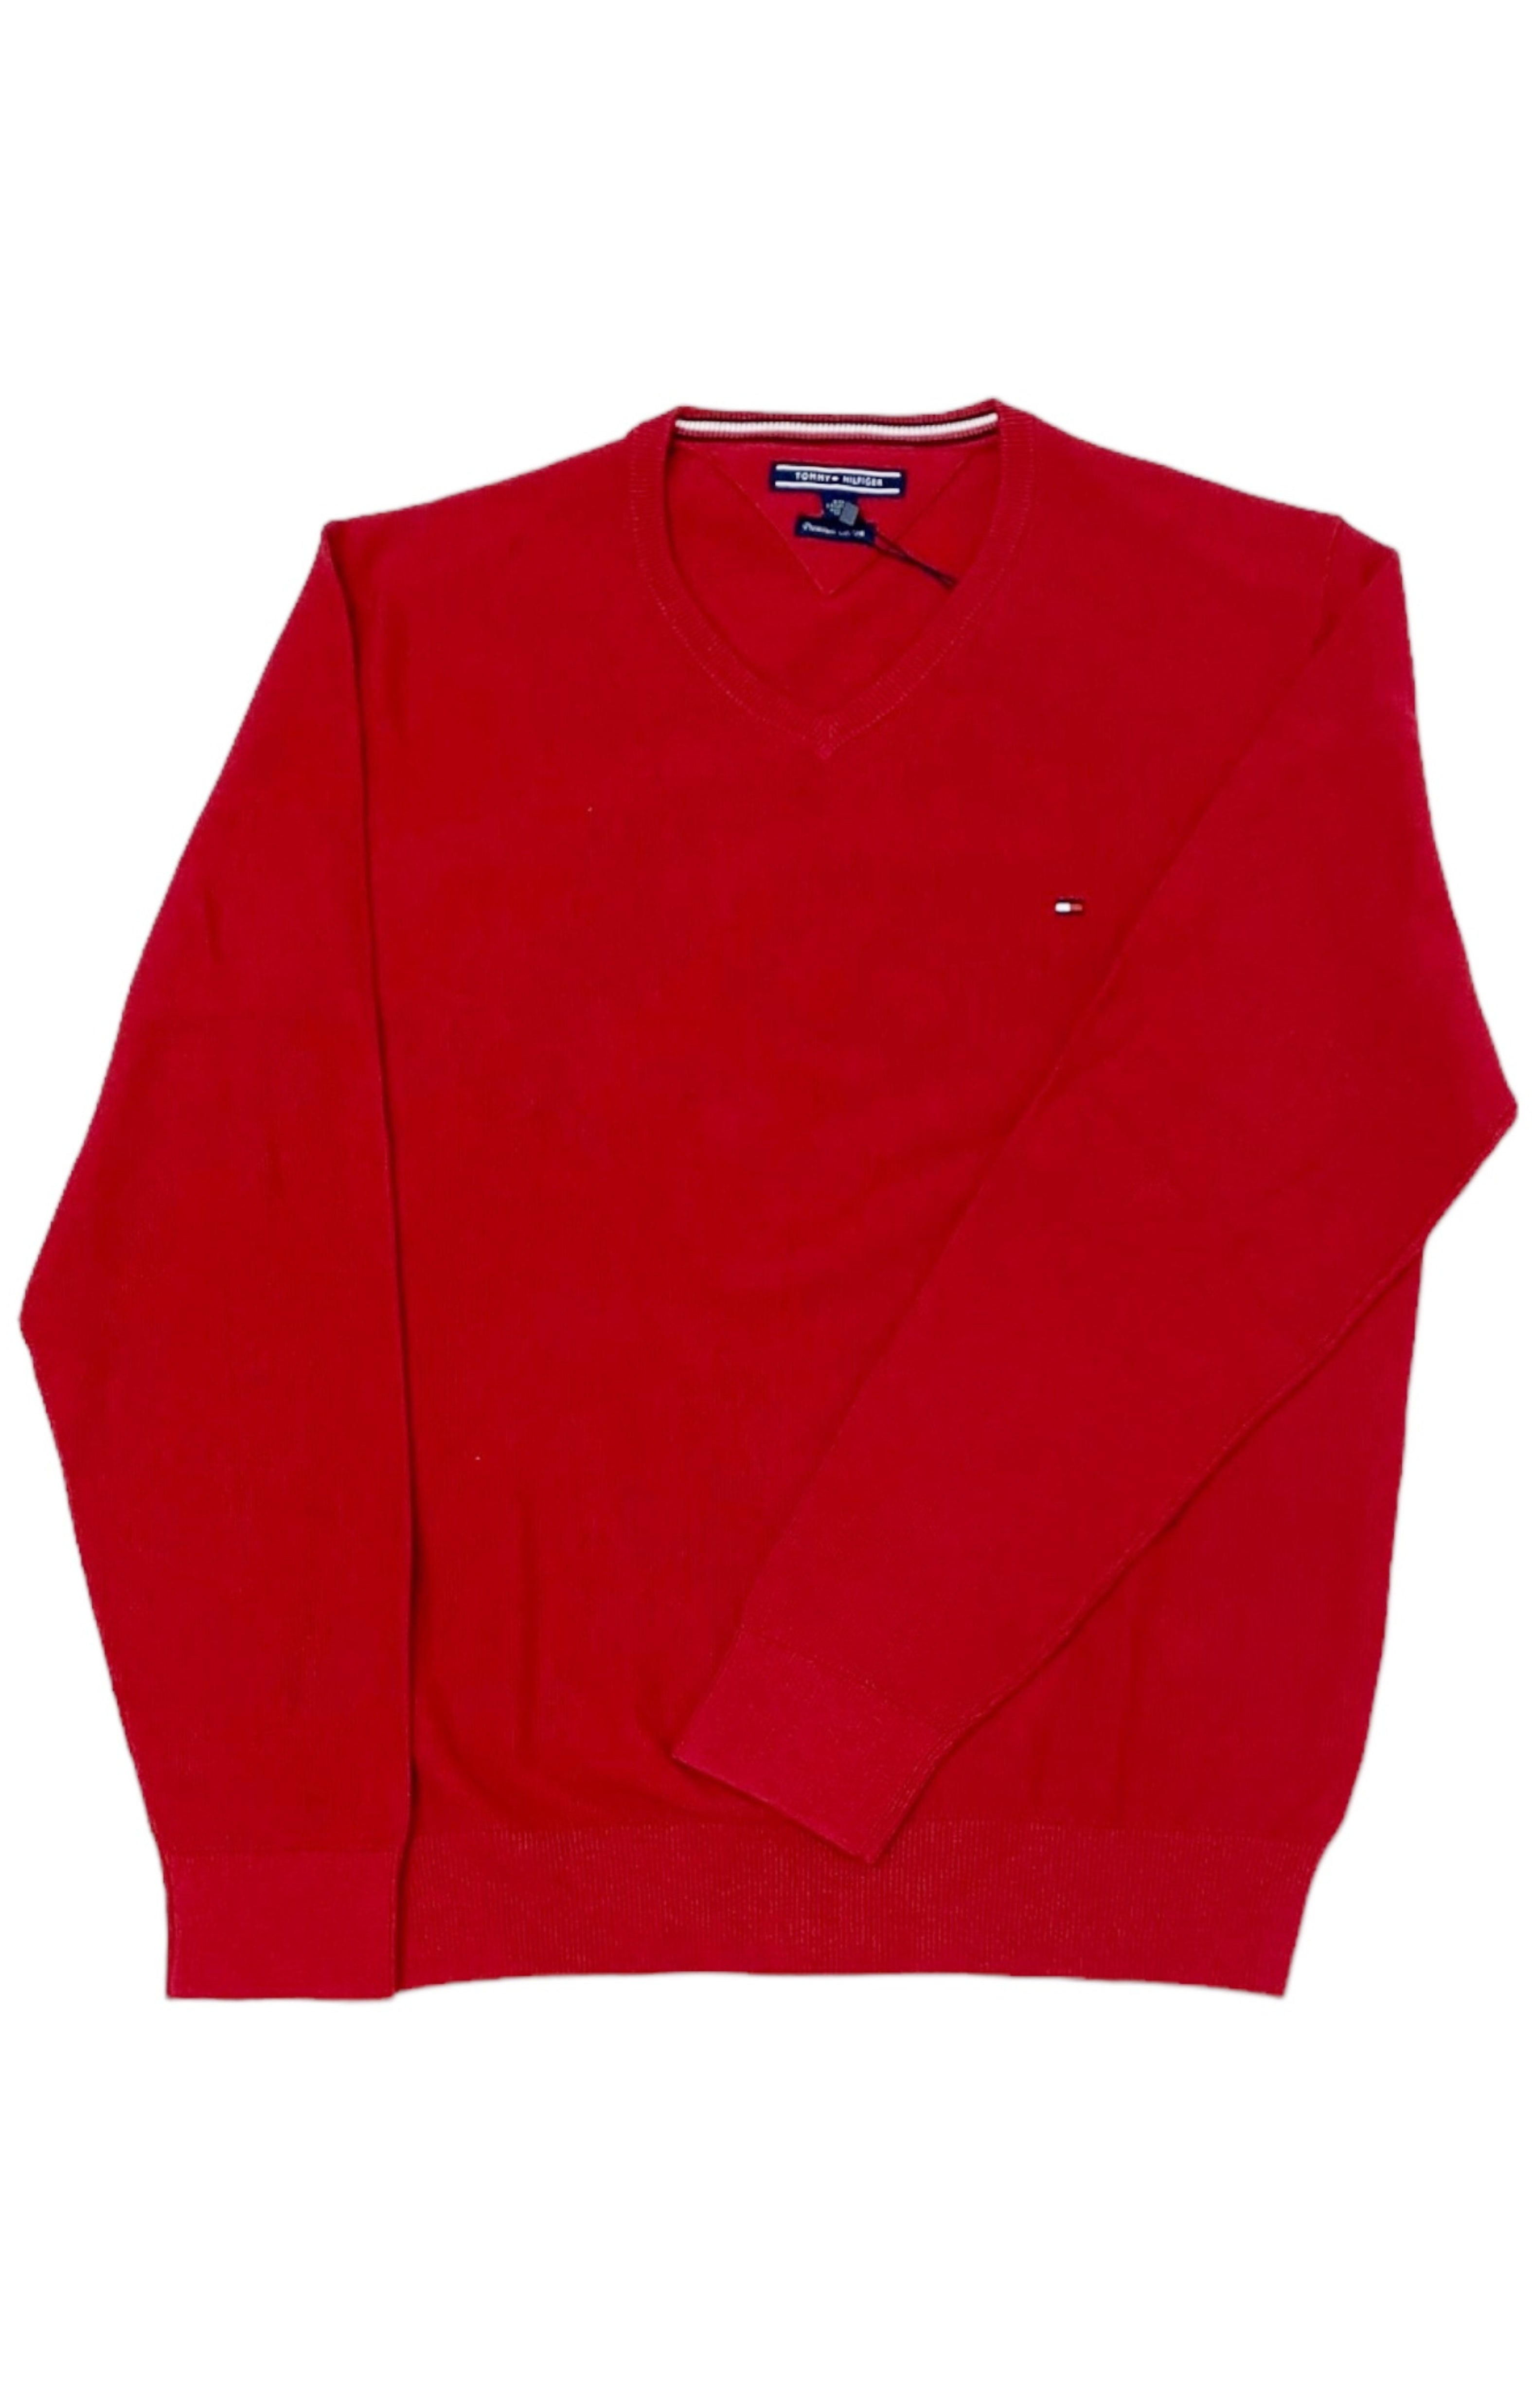 TOMMY HILFIGER (NEW) with tags Sweater Size: 2XL